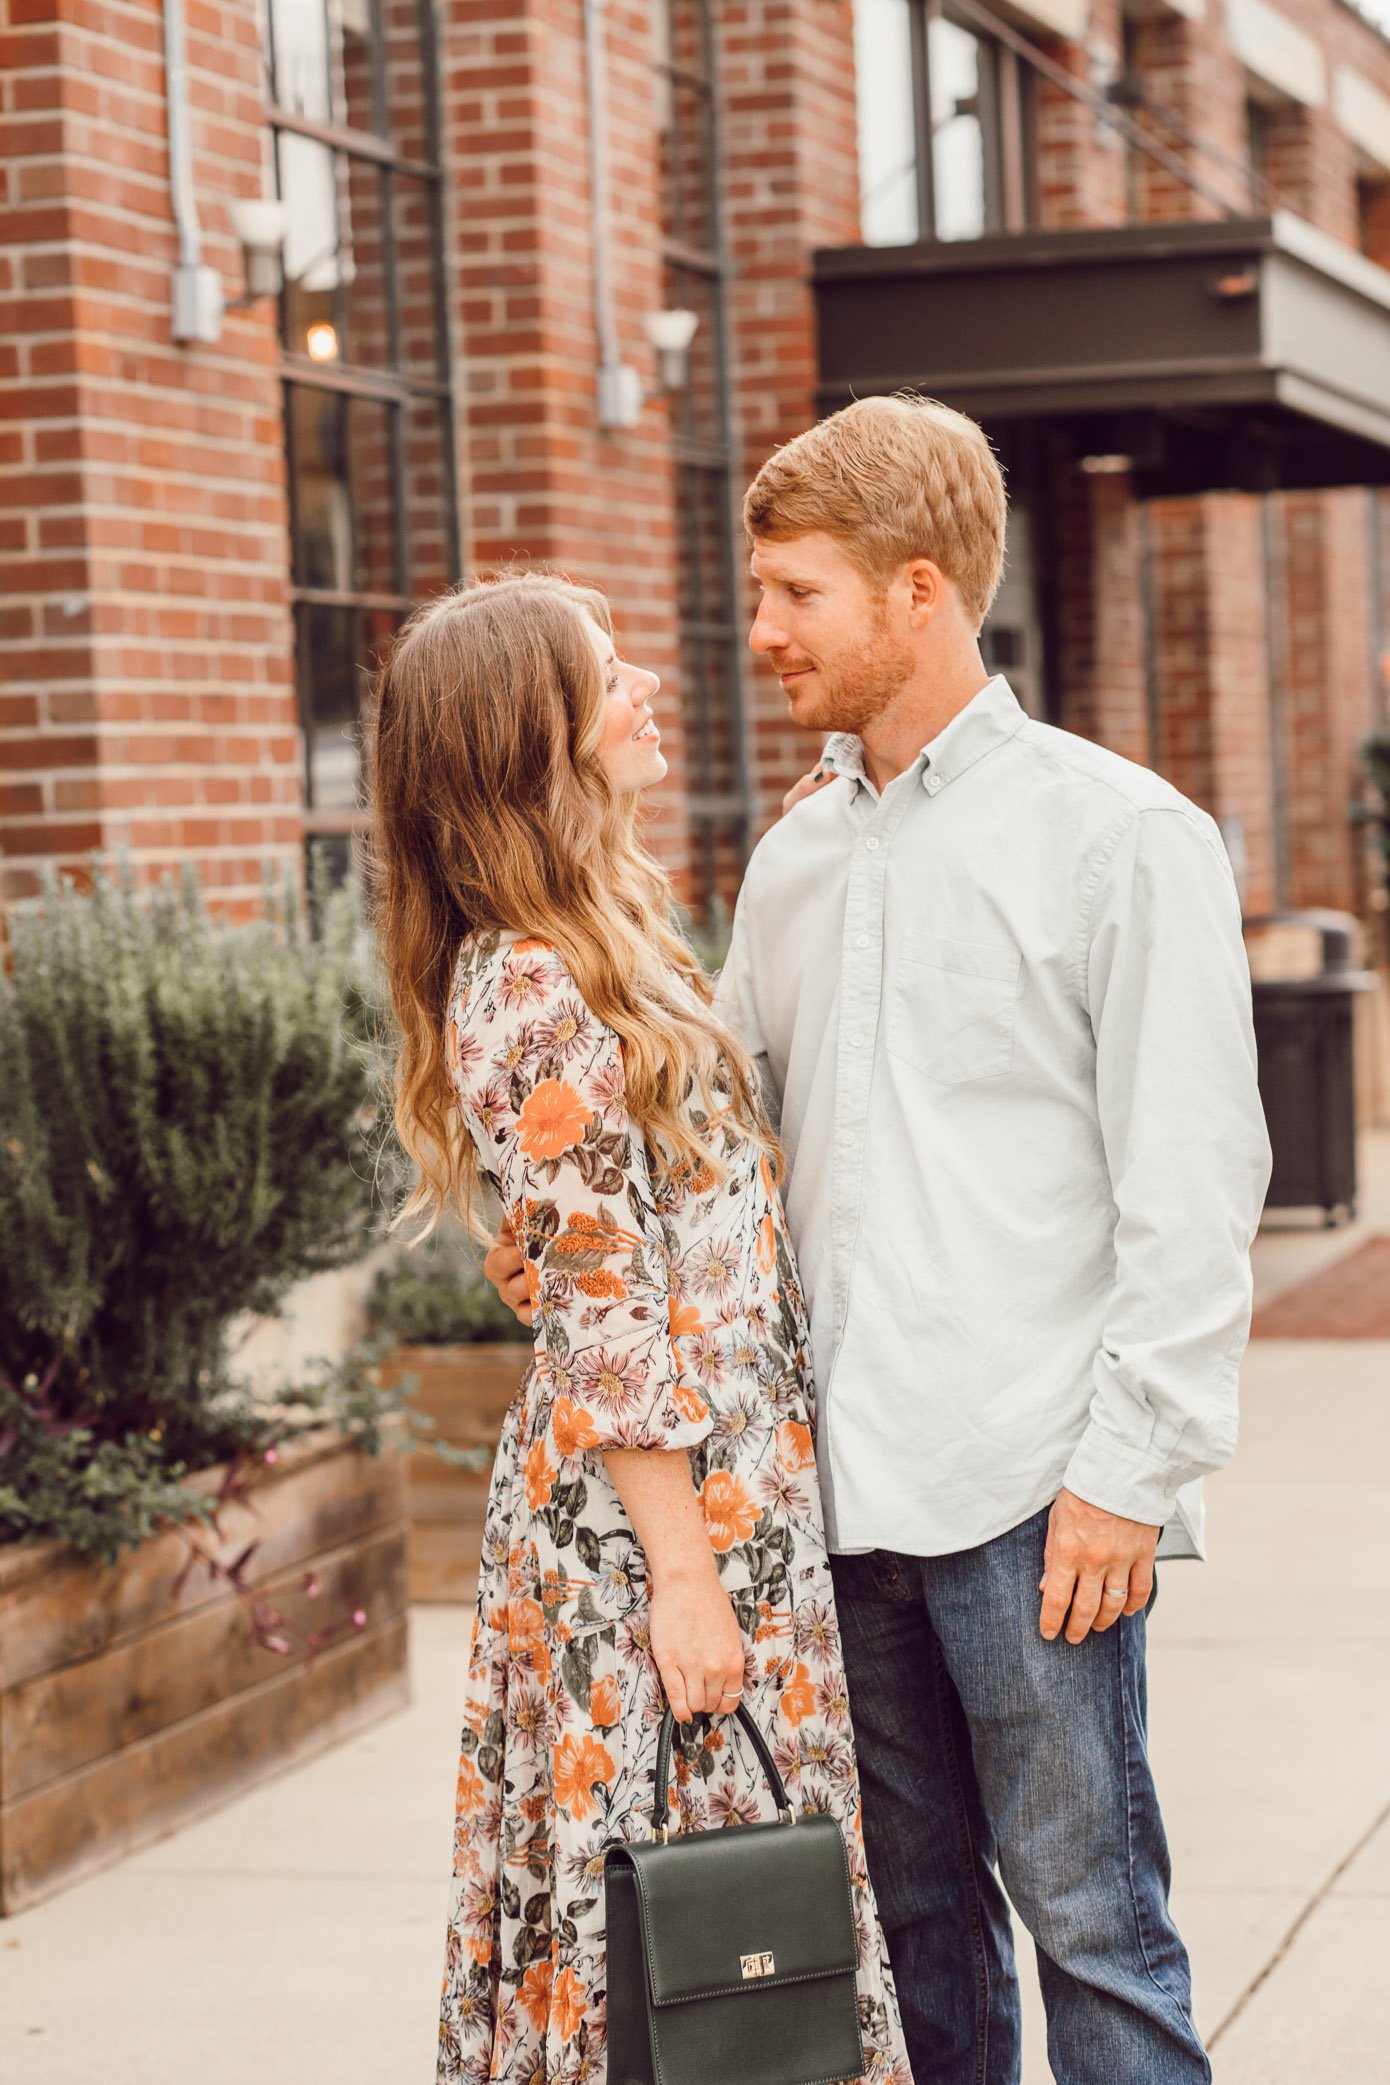 Five Ways to Step Up Your Date Night Beauty Game | Date Night Beauty Tips featured on Louella Reese Blog